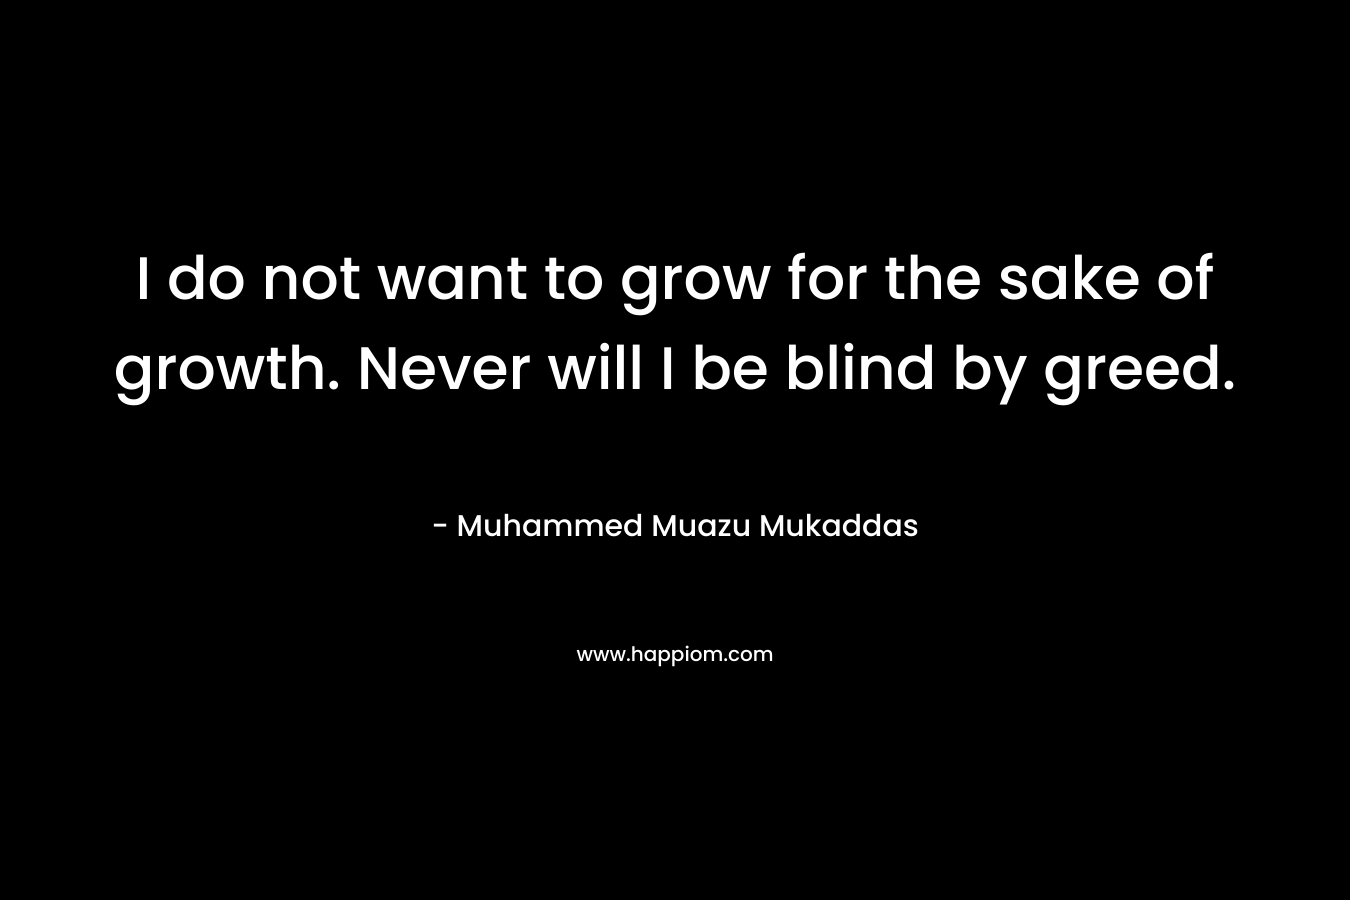 I do not want to grow for the sake of growth. Never will I be blind by greed.